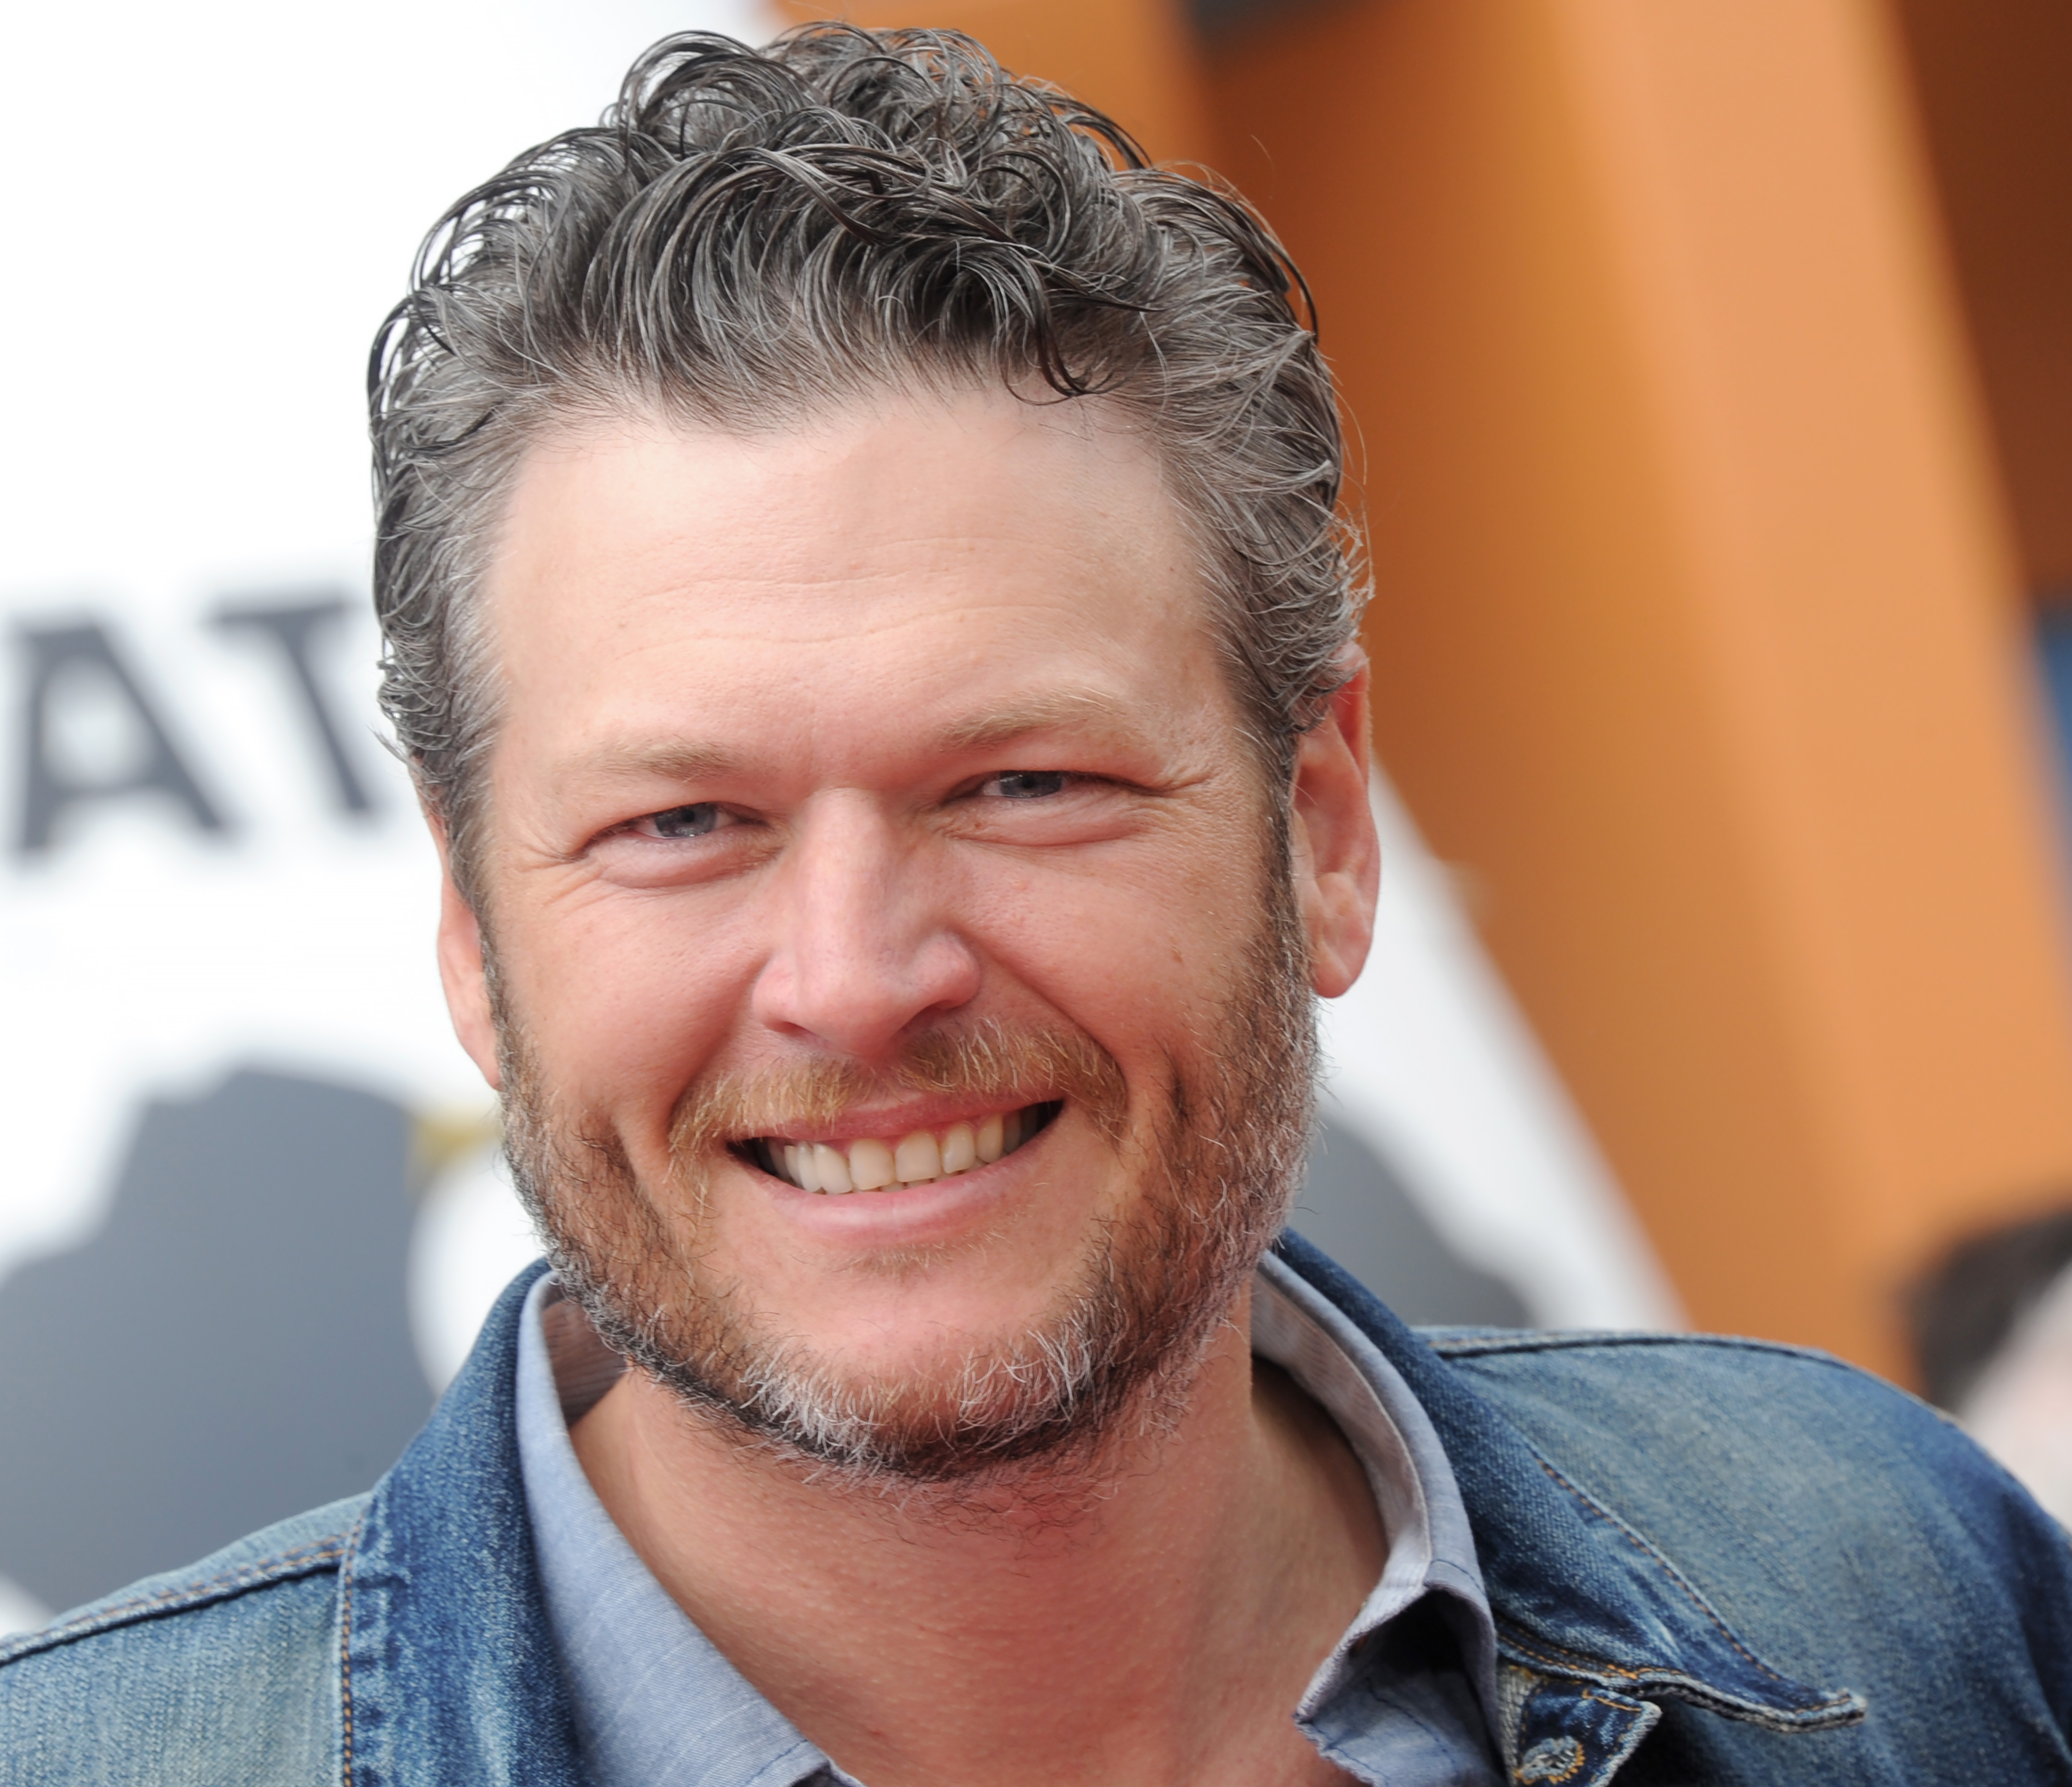 Blake Shelton at the premiere of "The Angry Birds Movie," 2016 | Sources: Getty Images